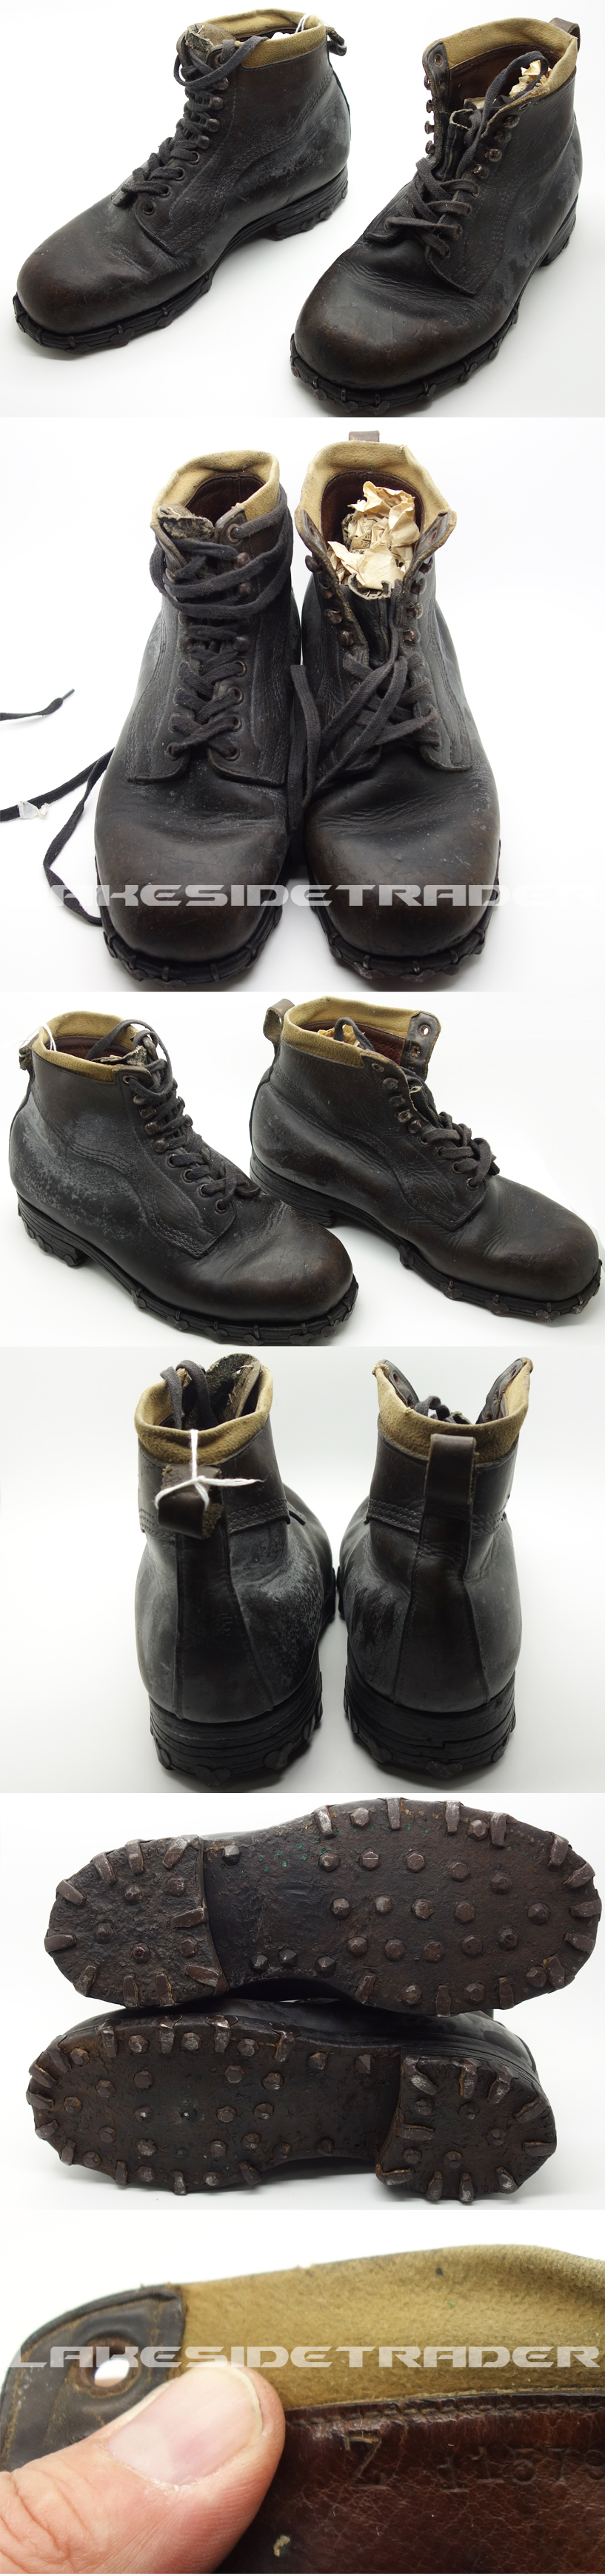 Mountain Troops Ankle Boots